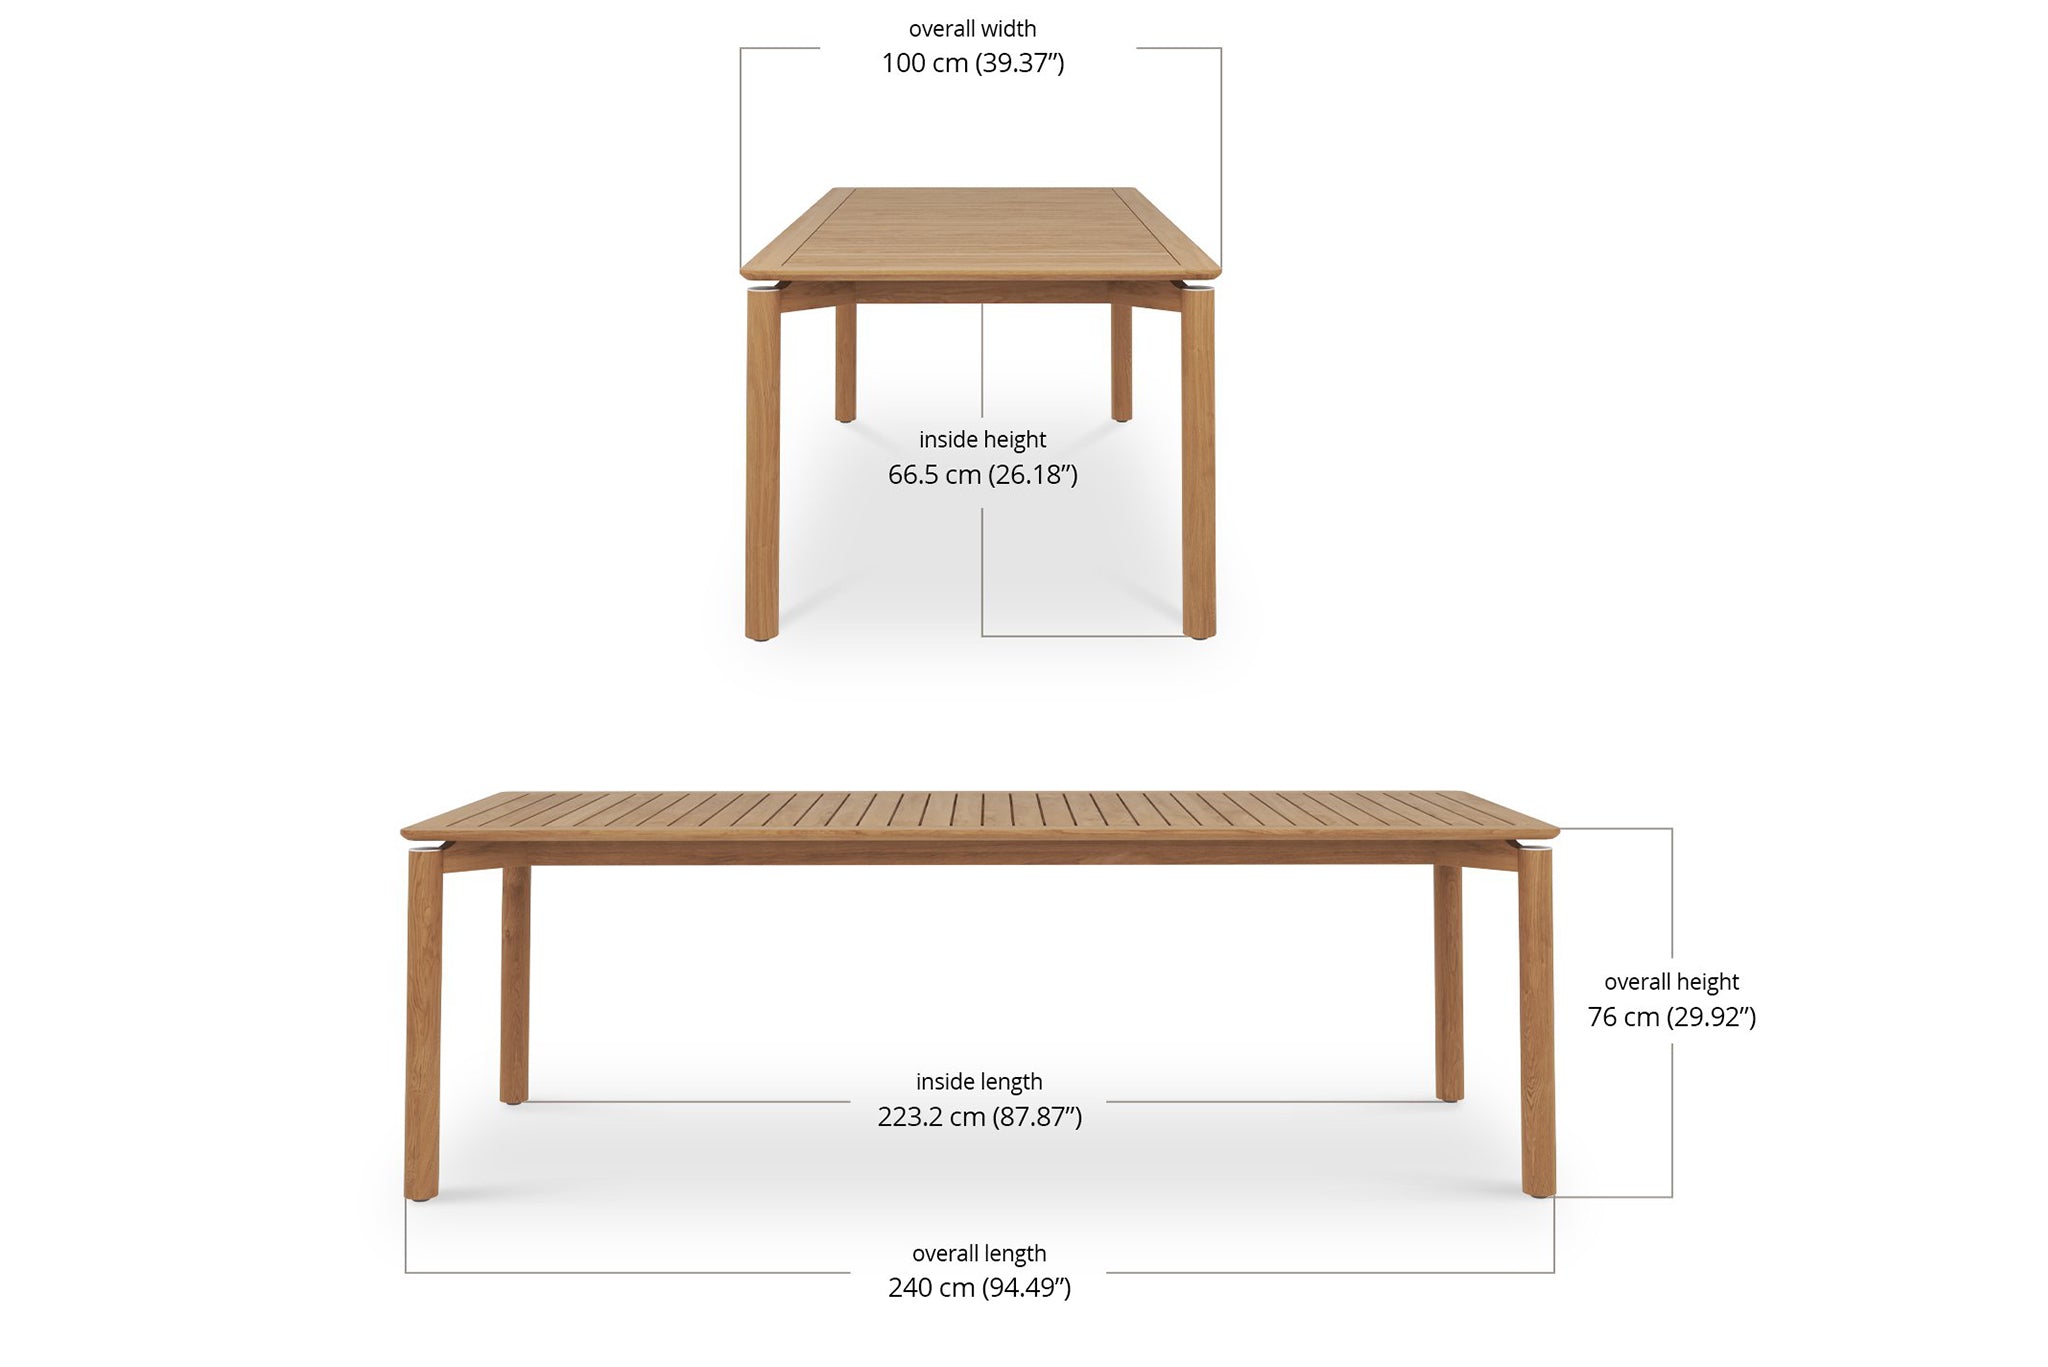 Jervis Bay Teak Outdoor Dining Table – 2.4m